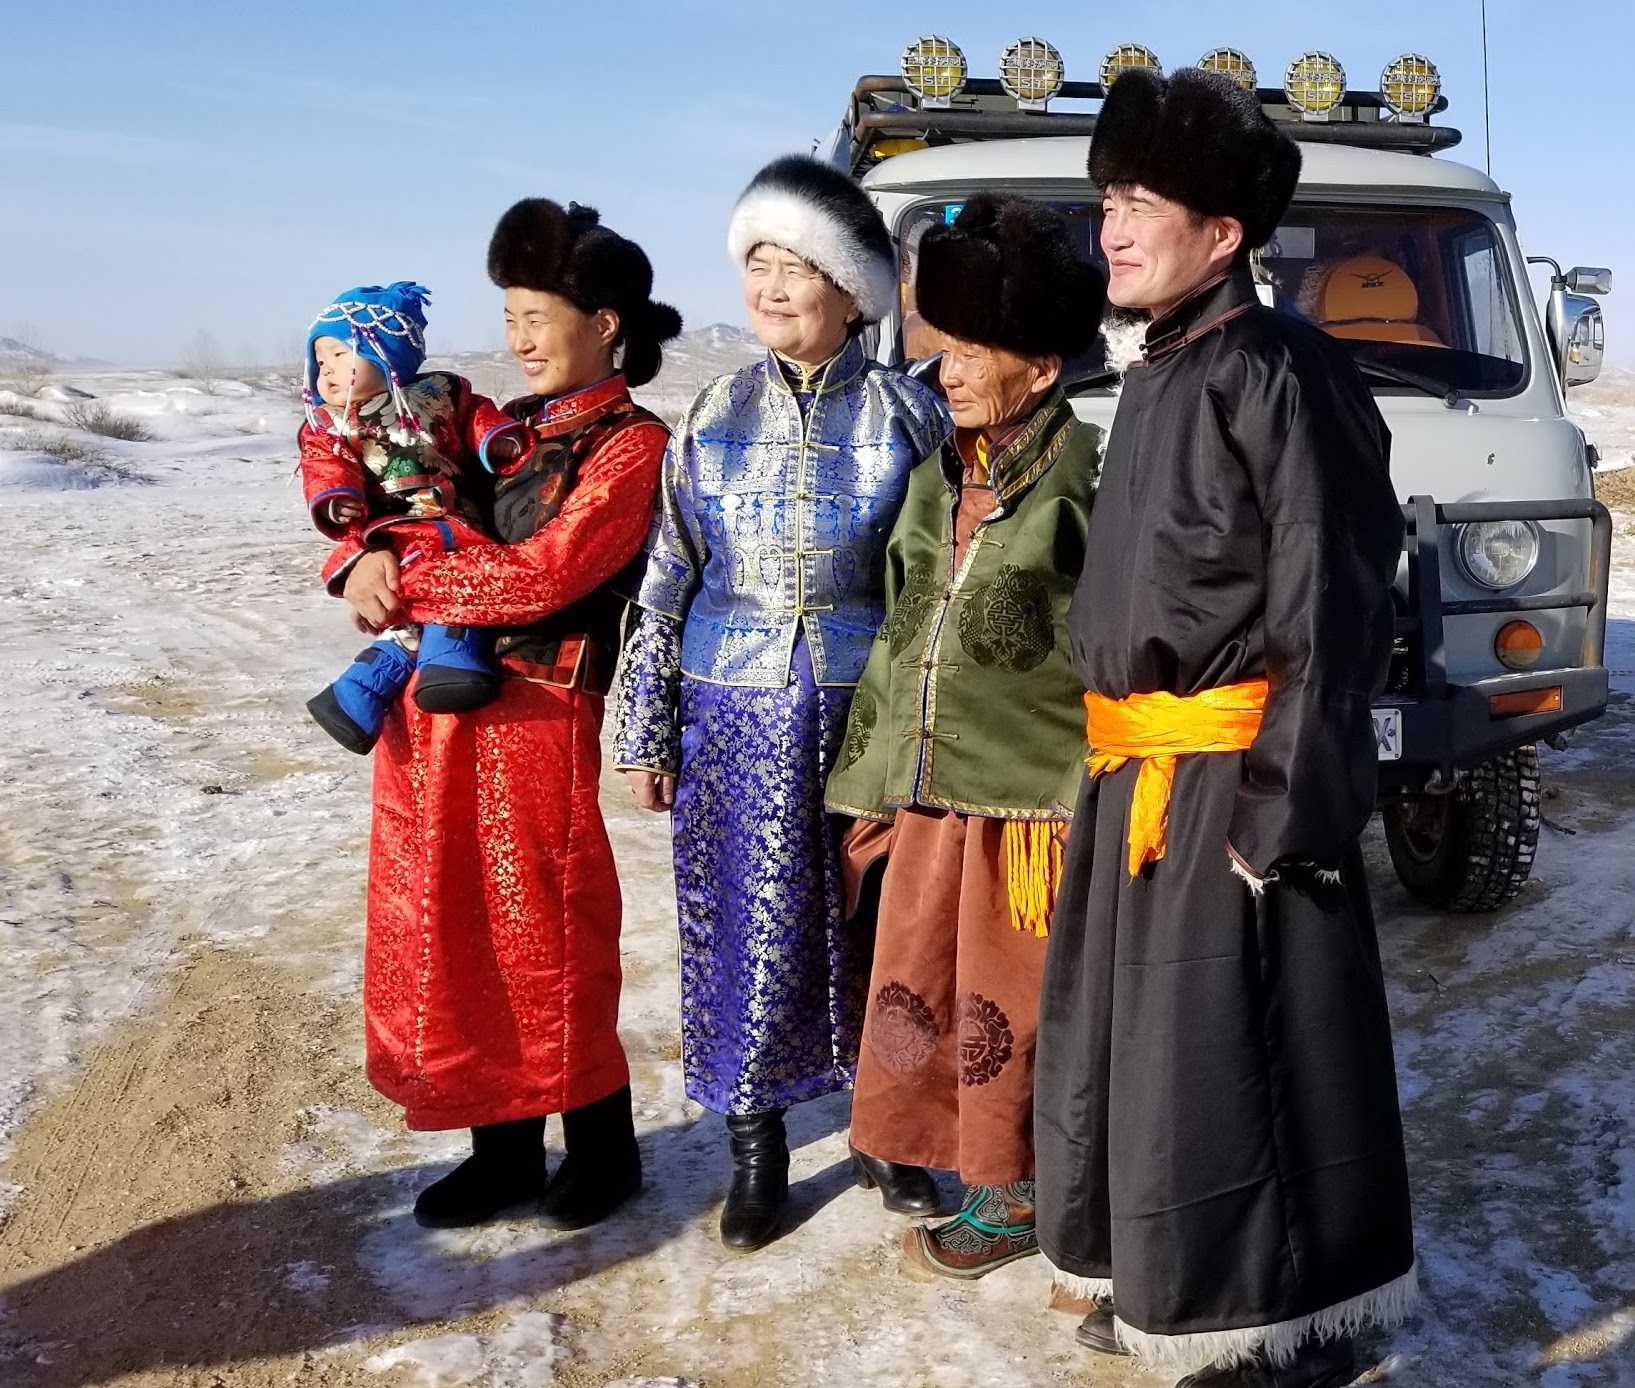 Meeting the Davaasuren as part of our Mongolia winter trip - Modern Nomads